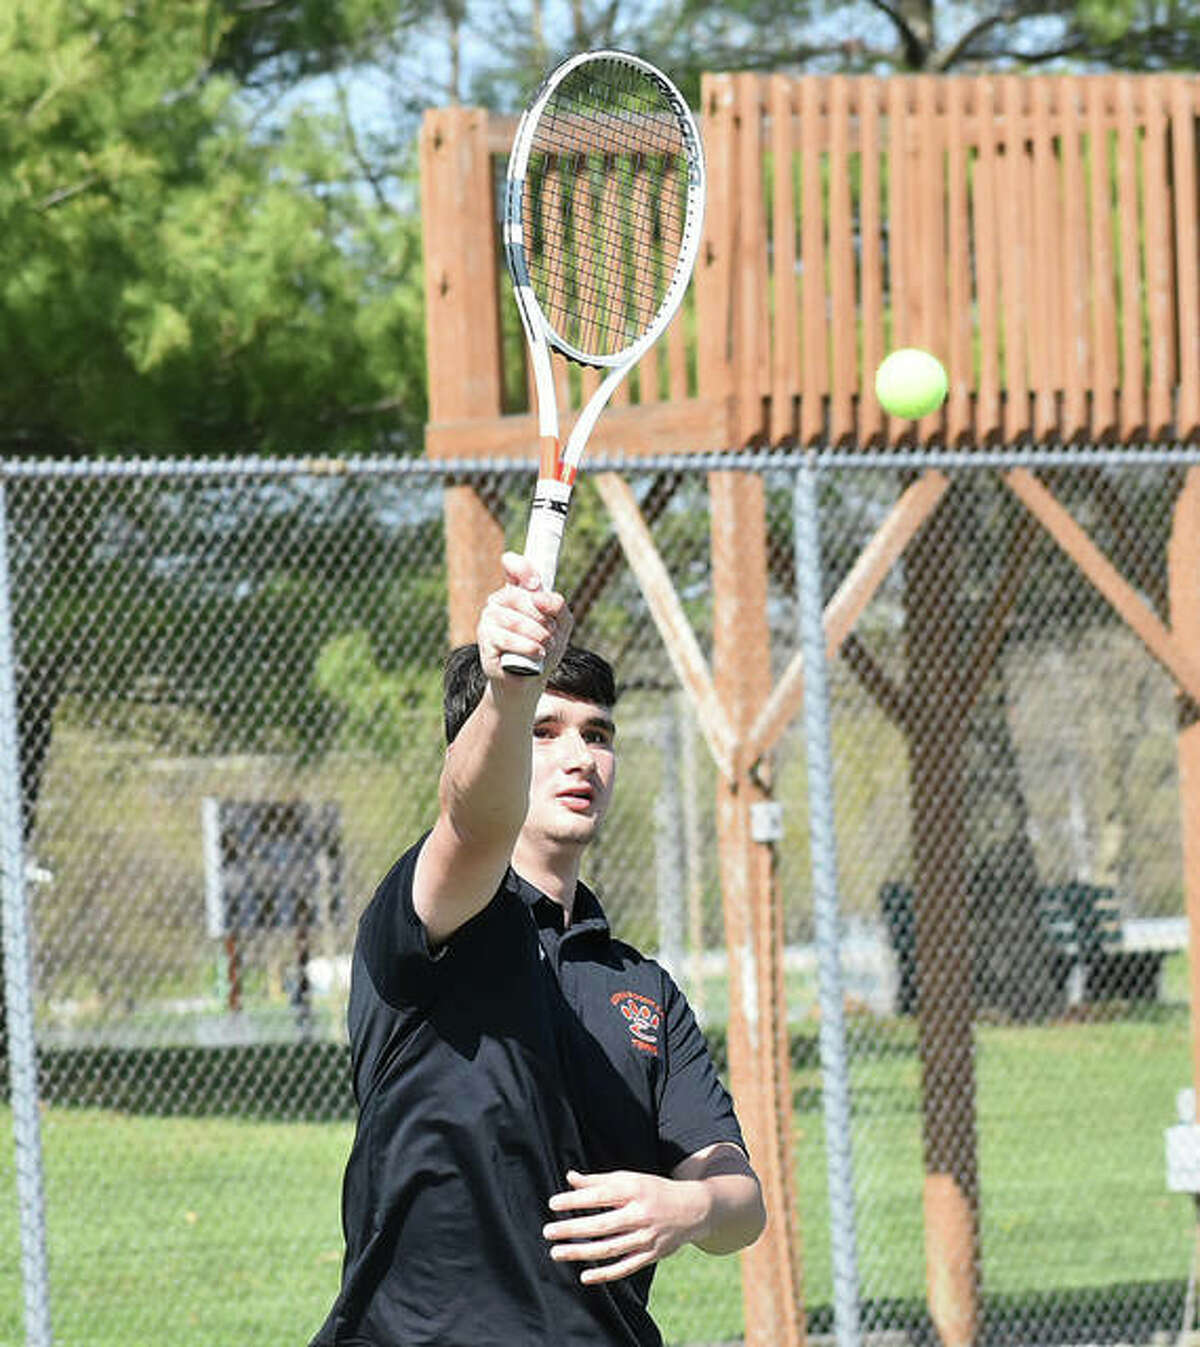 Edwardsville’s Michael Karibian hits a shot from near the net in his doubles match against Belleville East on April 13 inside the EHS Tennis Center. Karibian and partner Jade Dynamic tied for 15th place at No. 1 doubles in the Pitchford Invitational at Hersey High School.